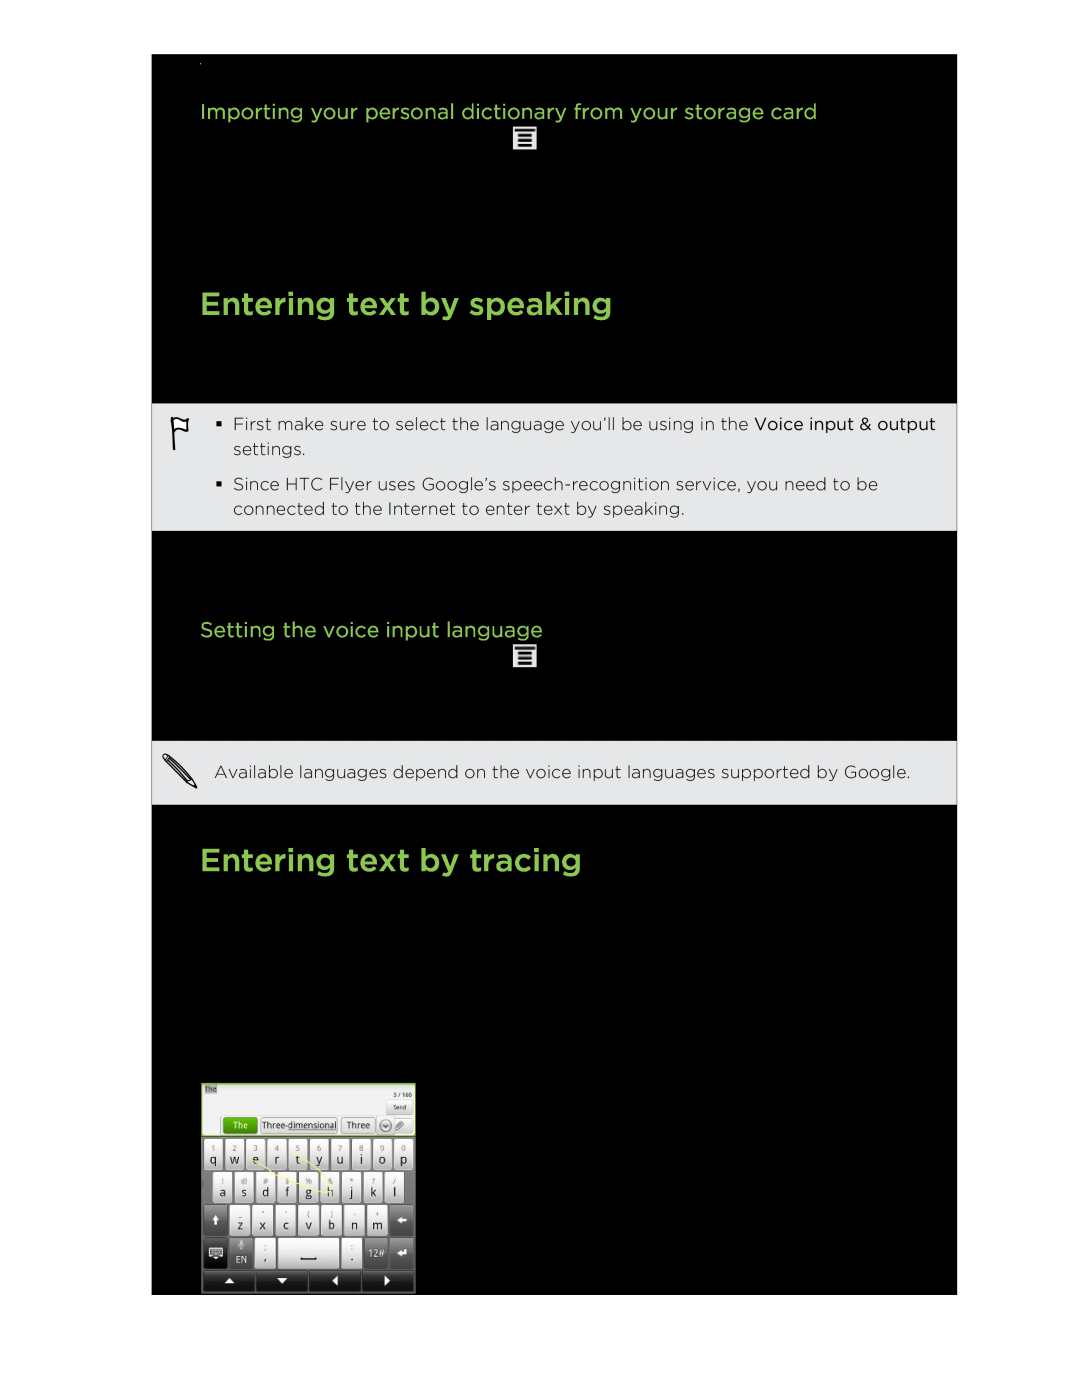 HTC HTCFlyerP512 manual Entering text by speaking, Entering text by tracing, Setting the voice input language 